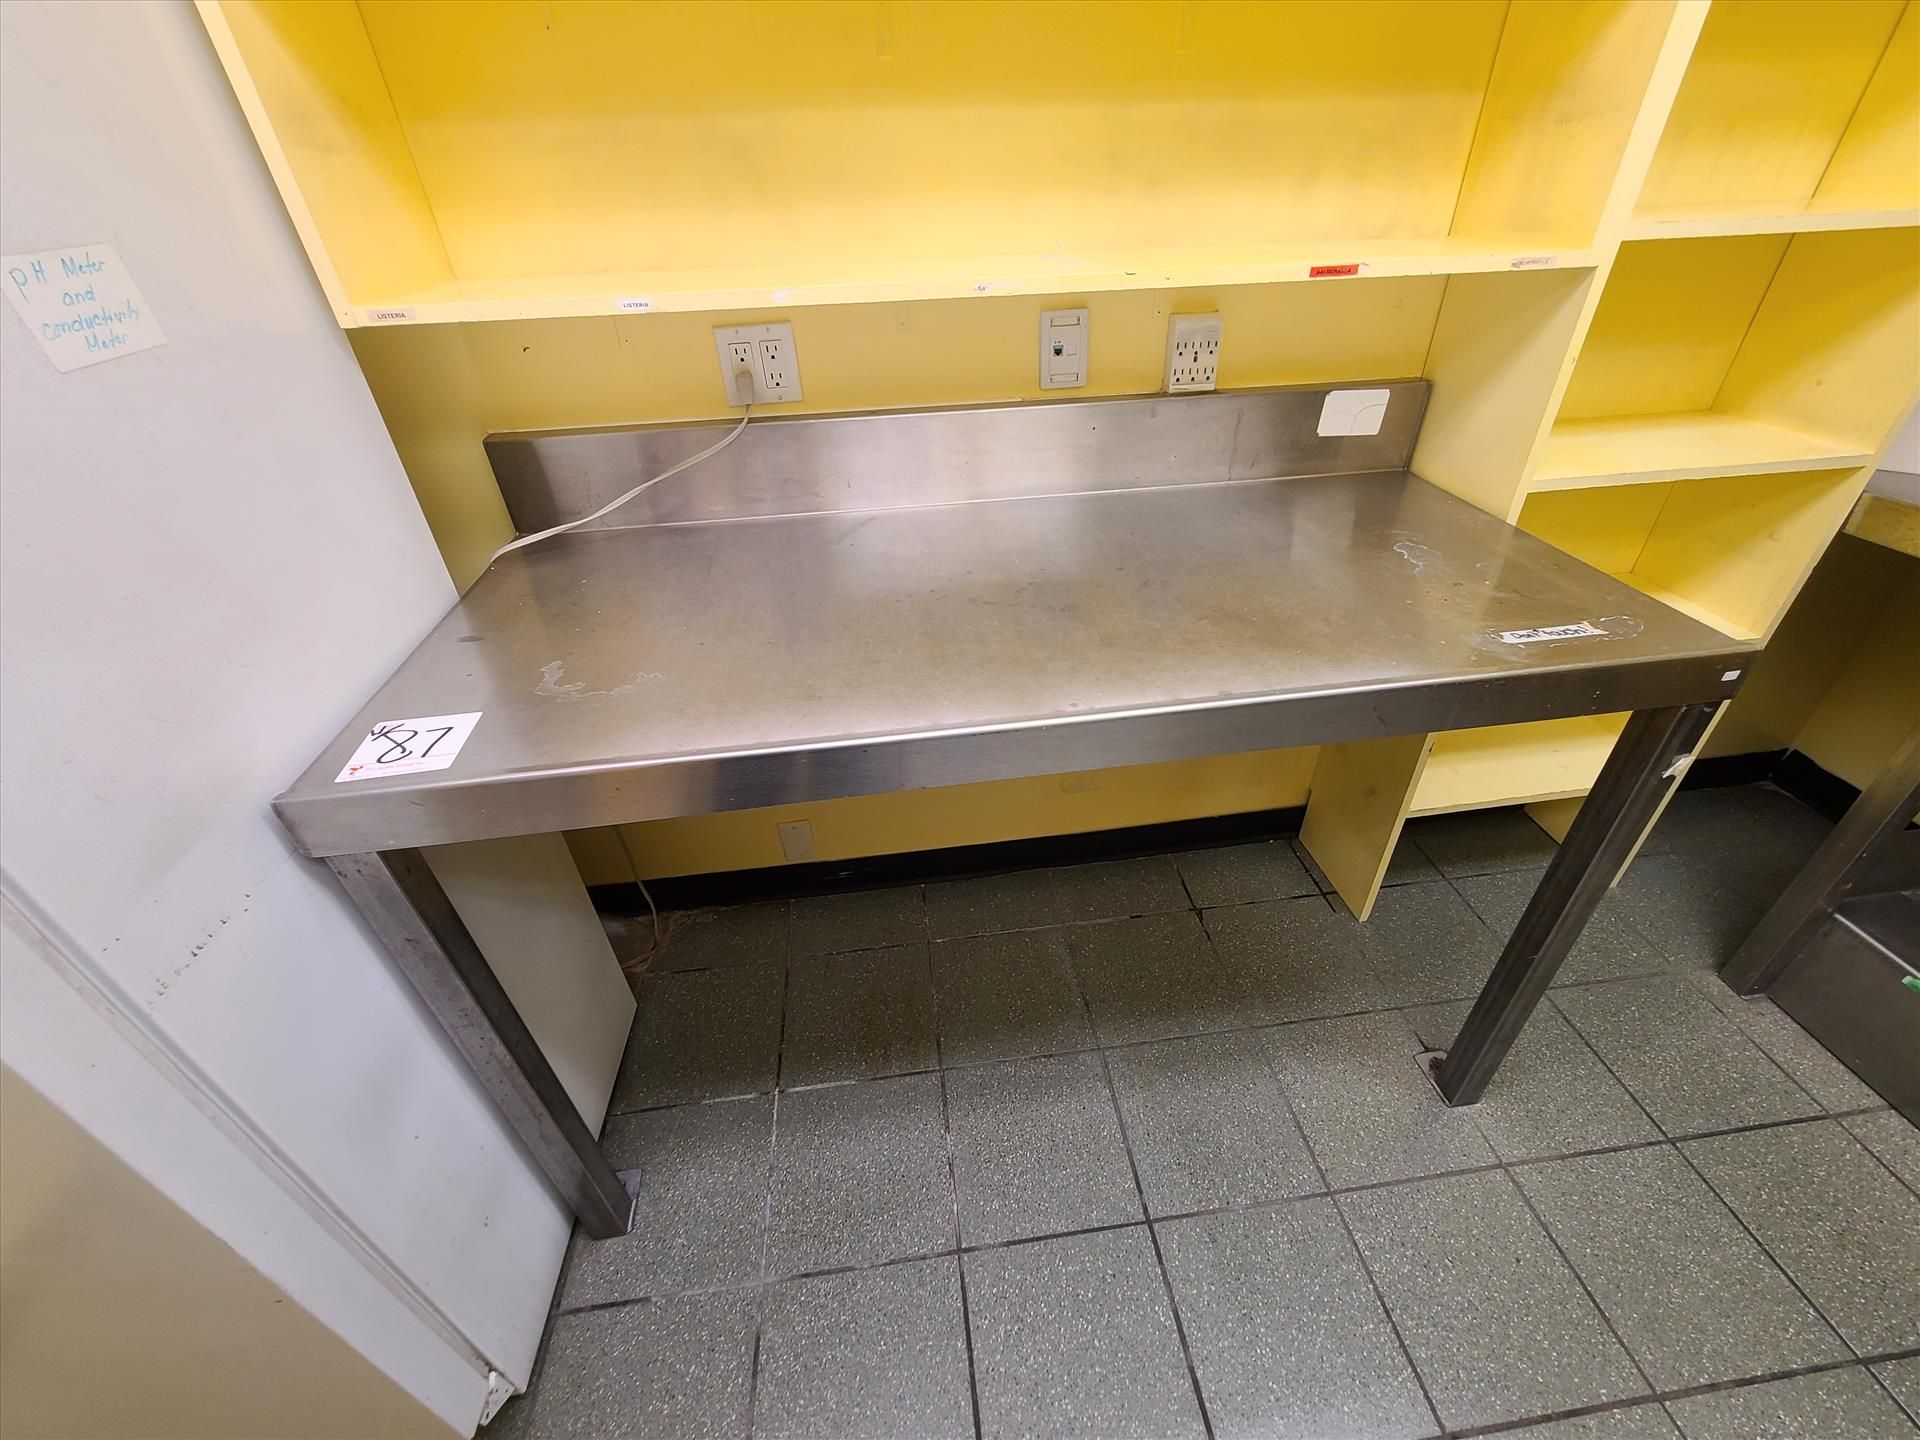 counter, stainless steel, approx. 28 in. x 22 ft. w/ sink [Loc. Lab] - Image 4 of 4